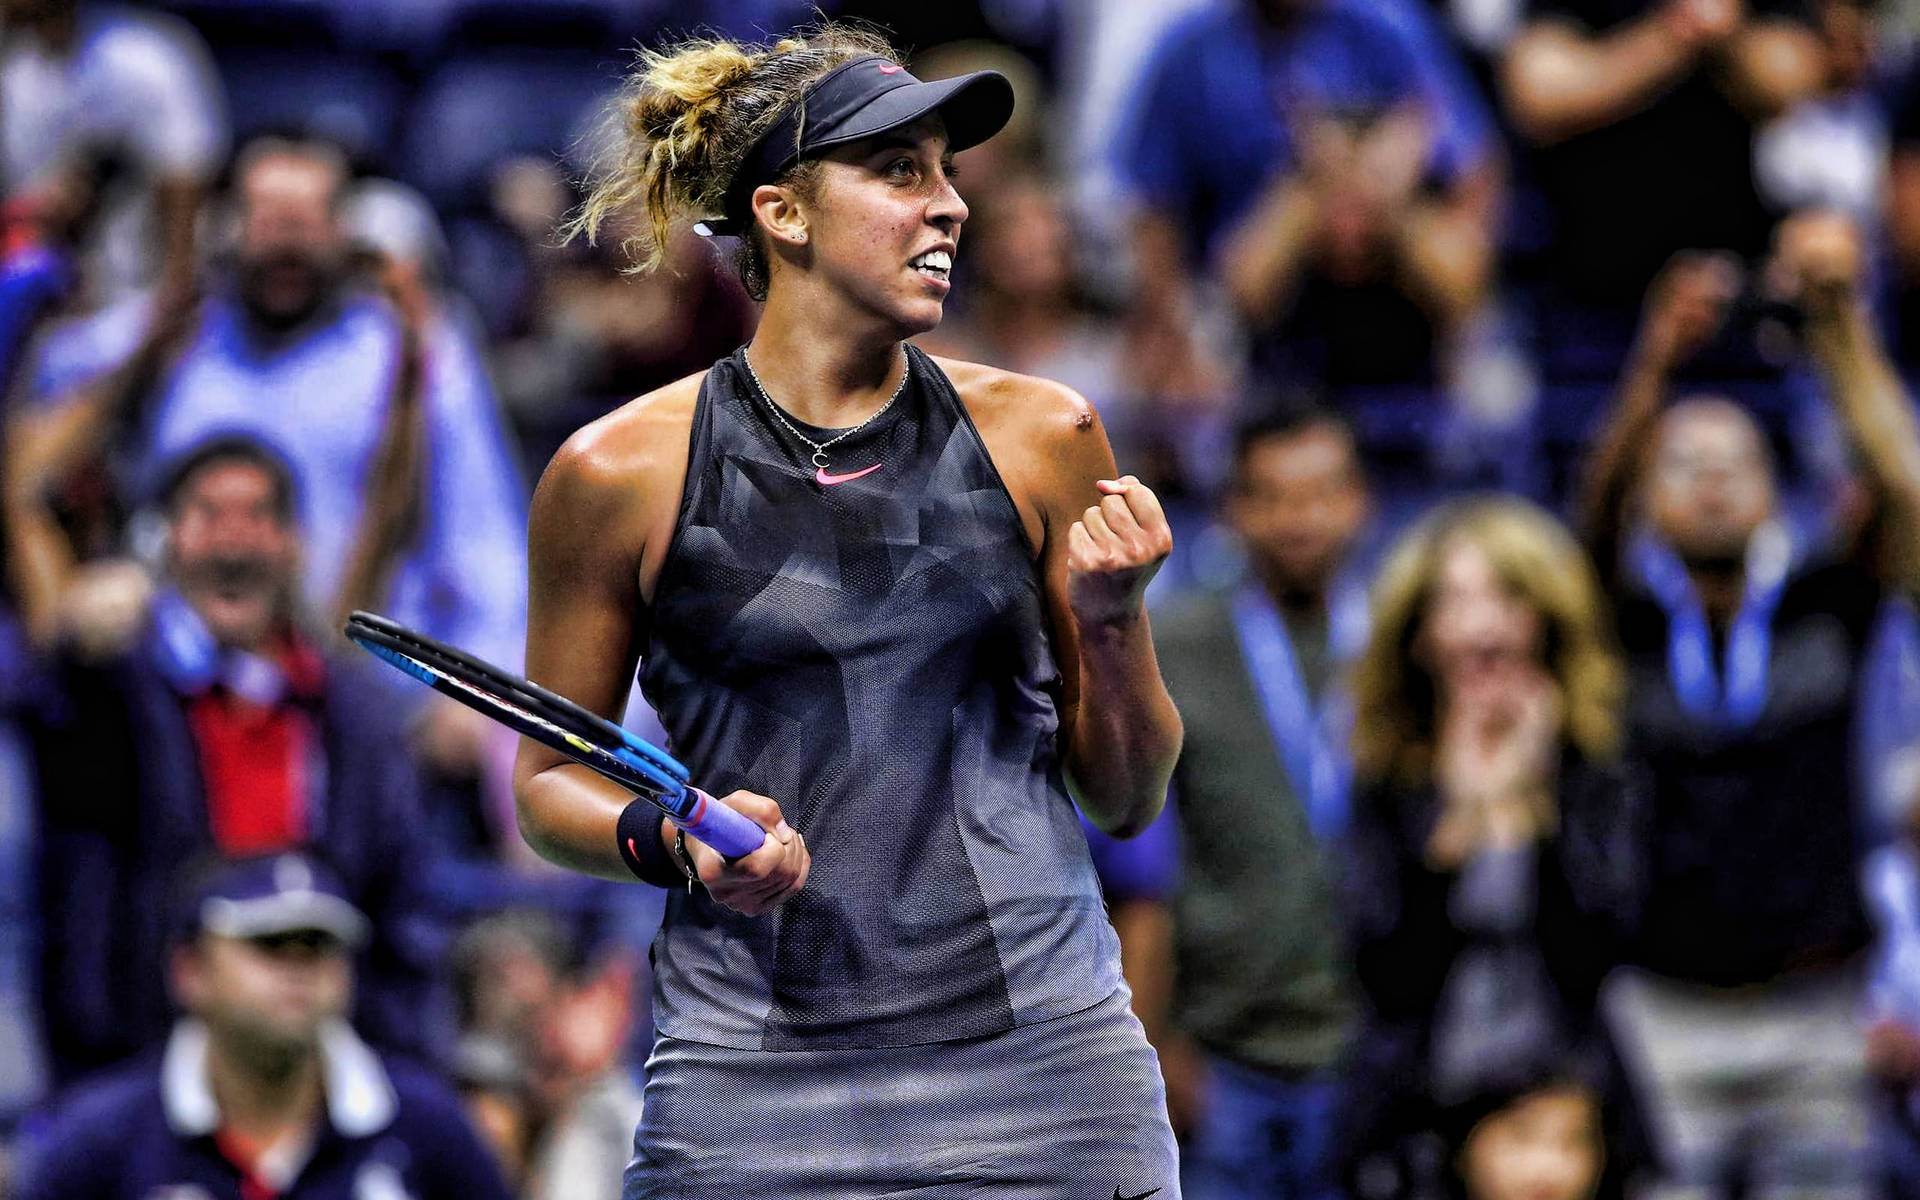 Madison Keys - Professional Tennis Player in Chic Black Outfit Wallpaper